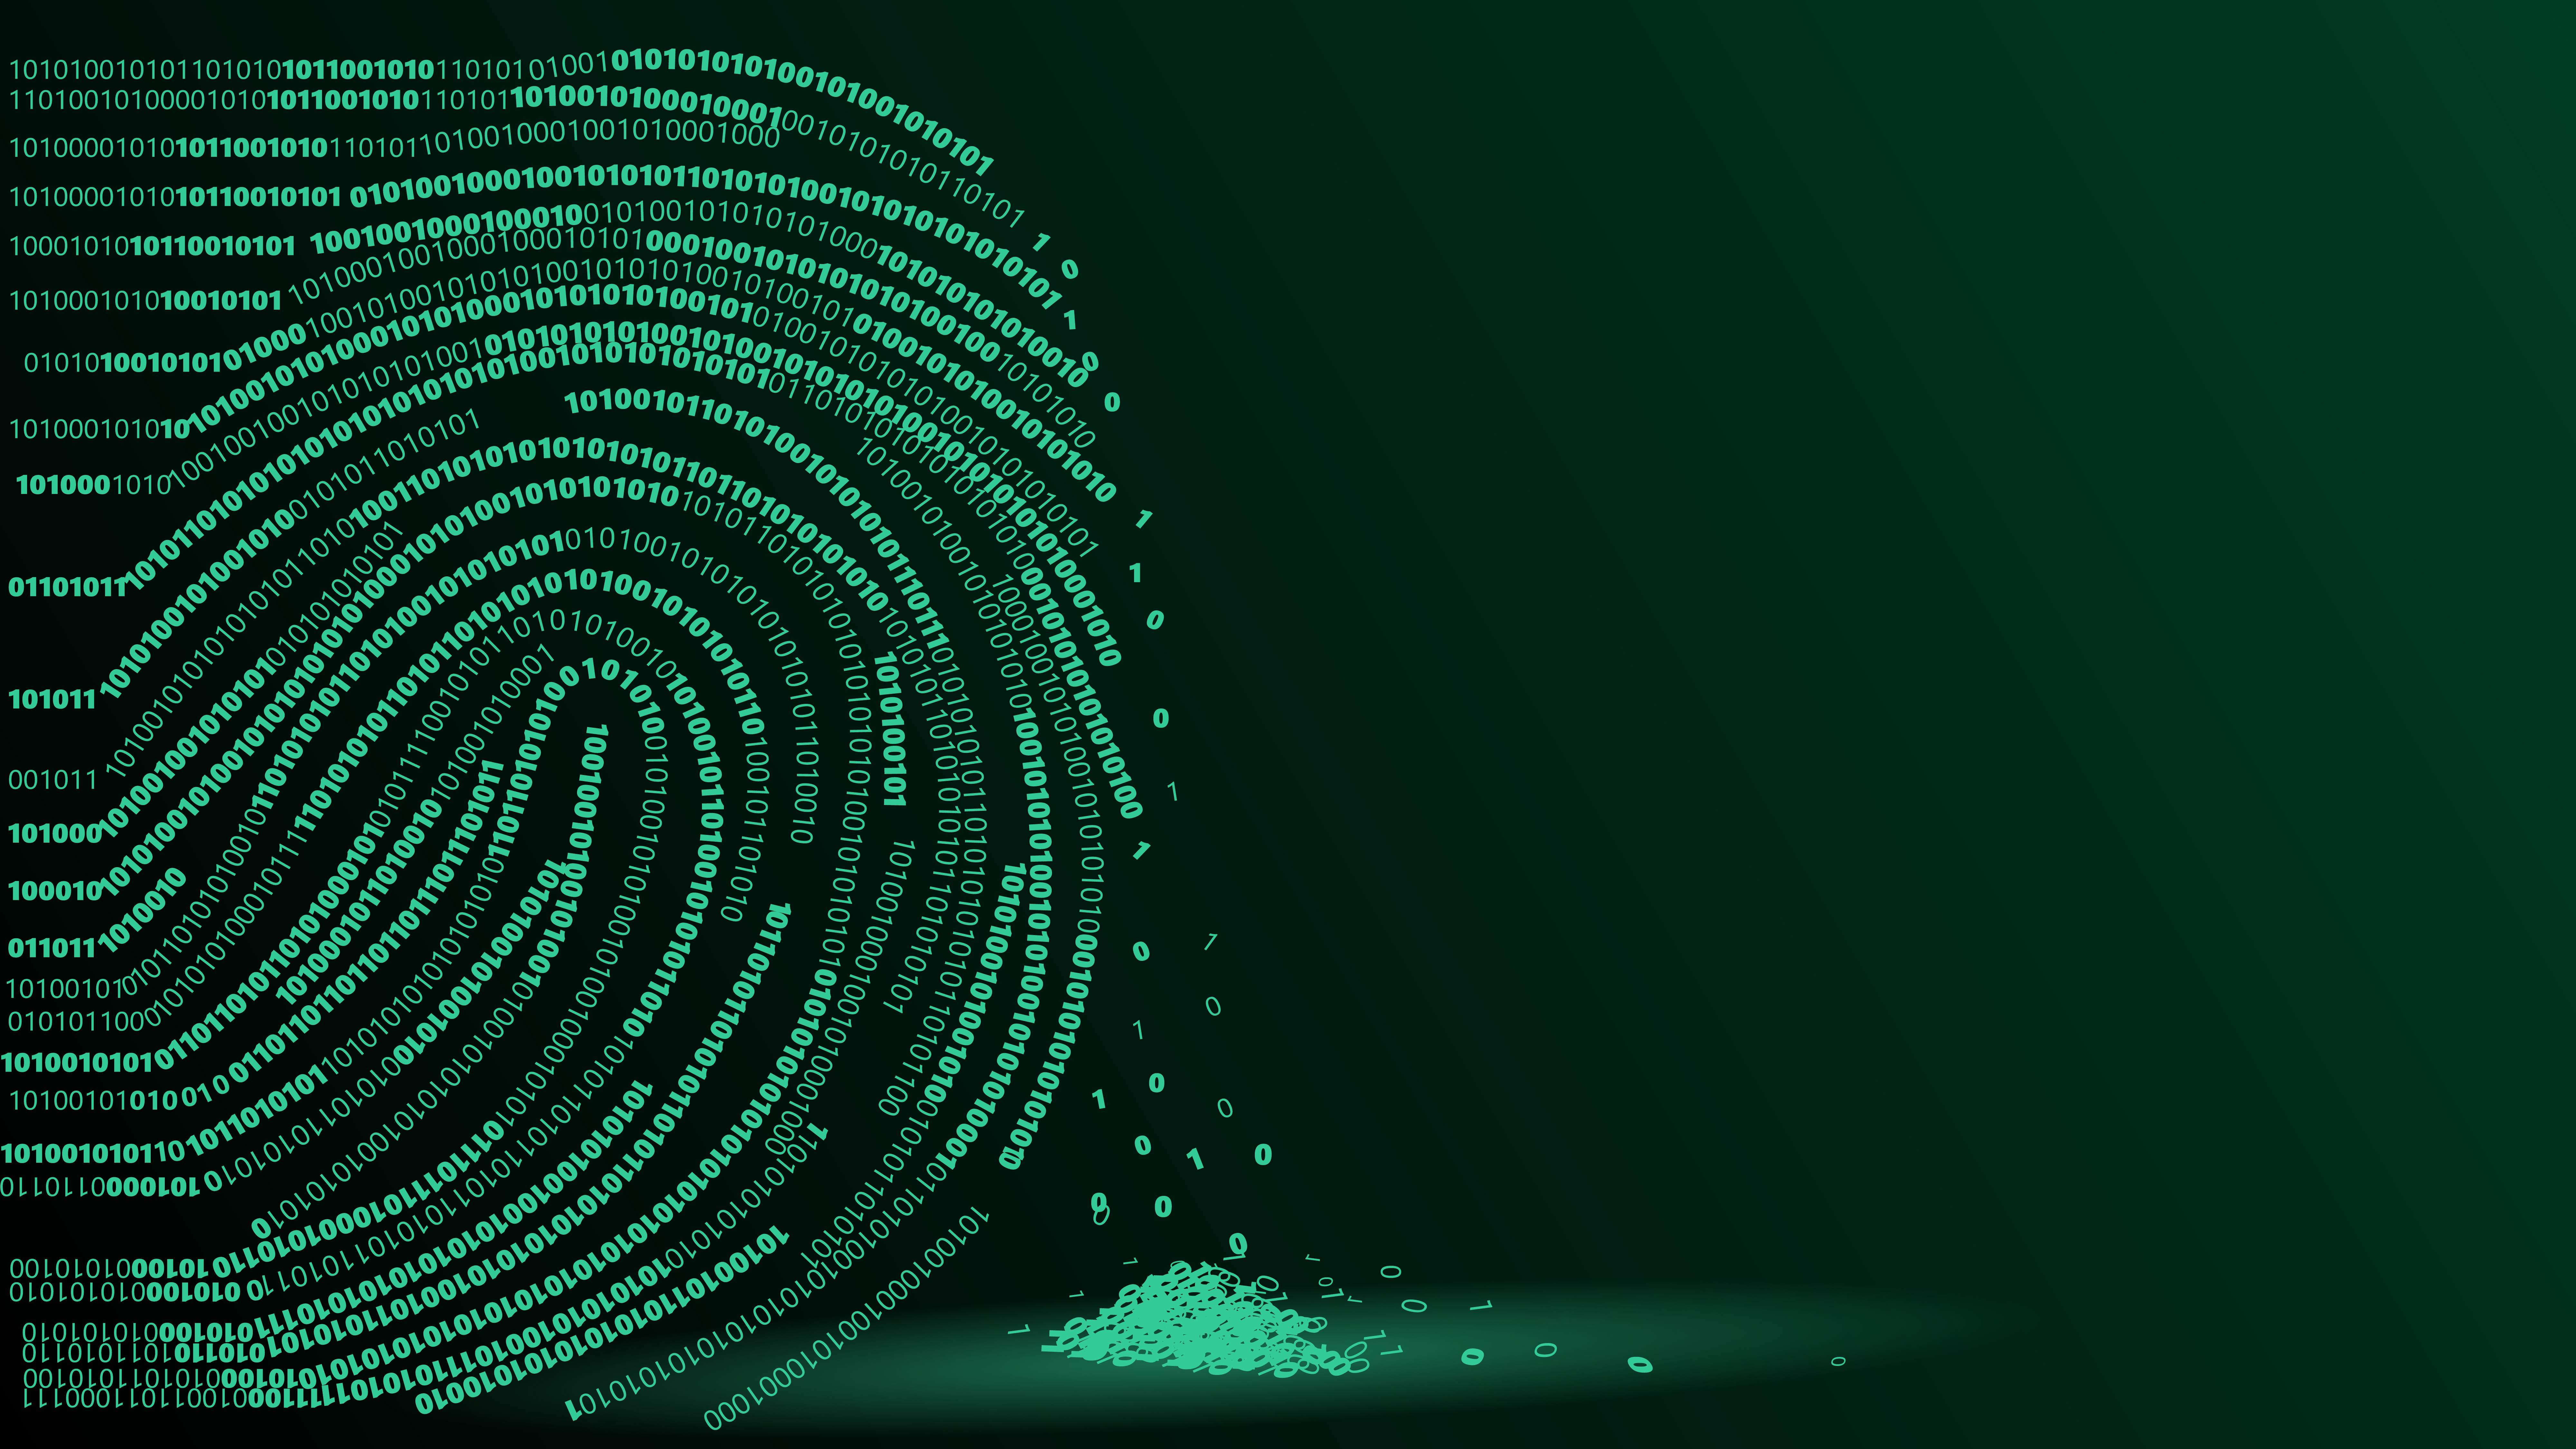 graphic illustration of a green fingerprint made of binary code dissolving into a pile on the ground